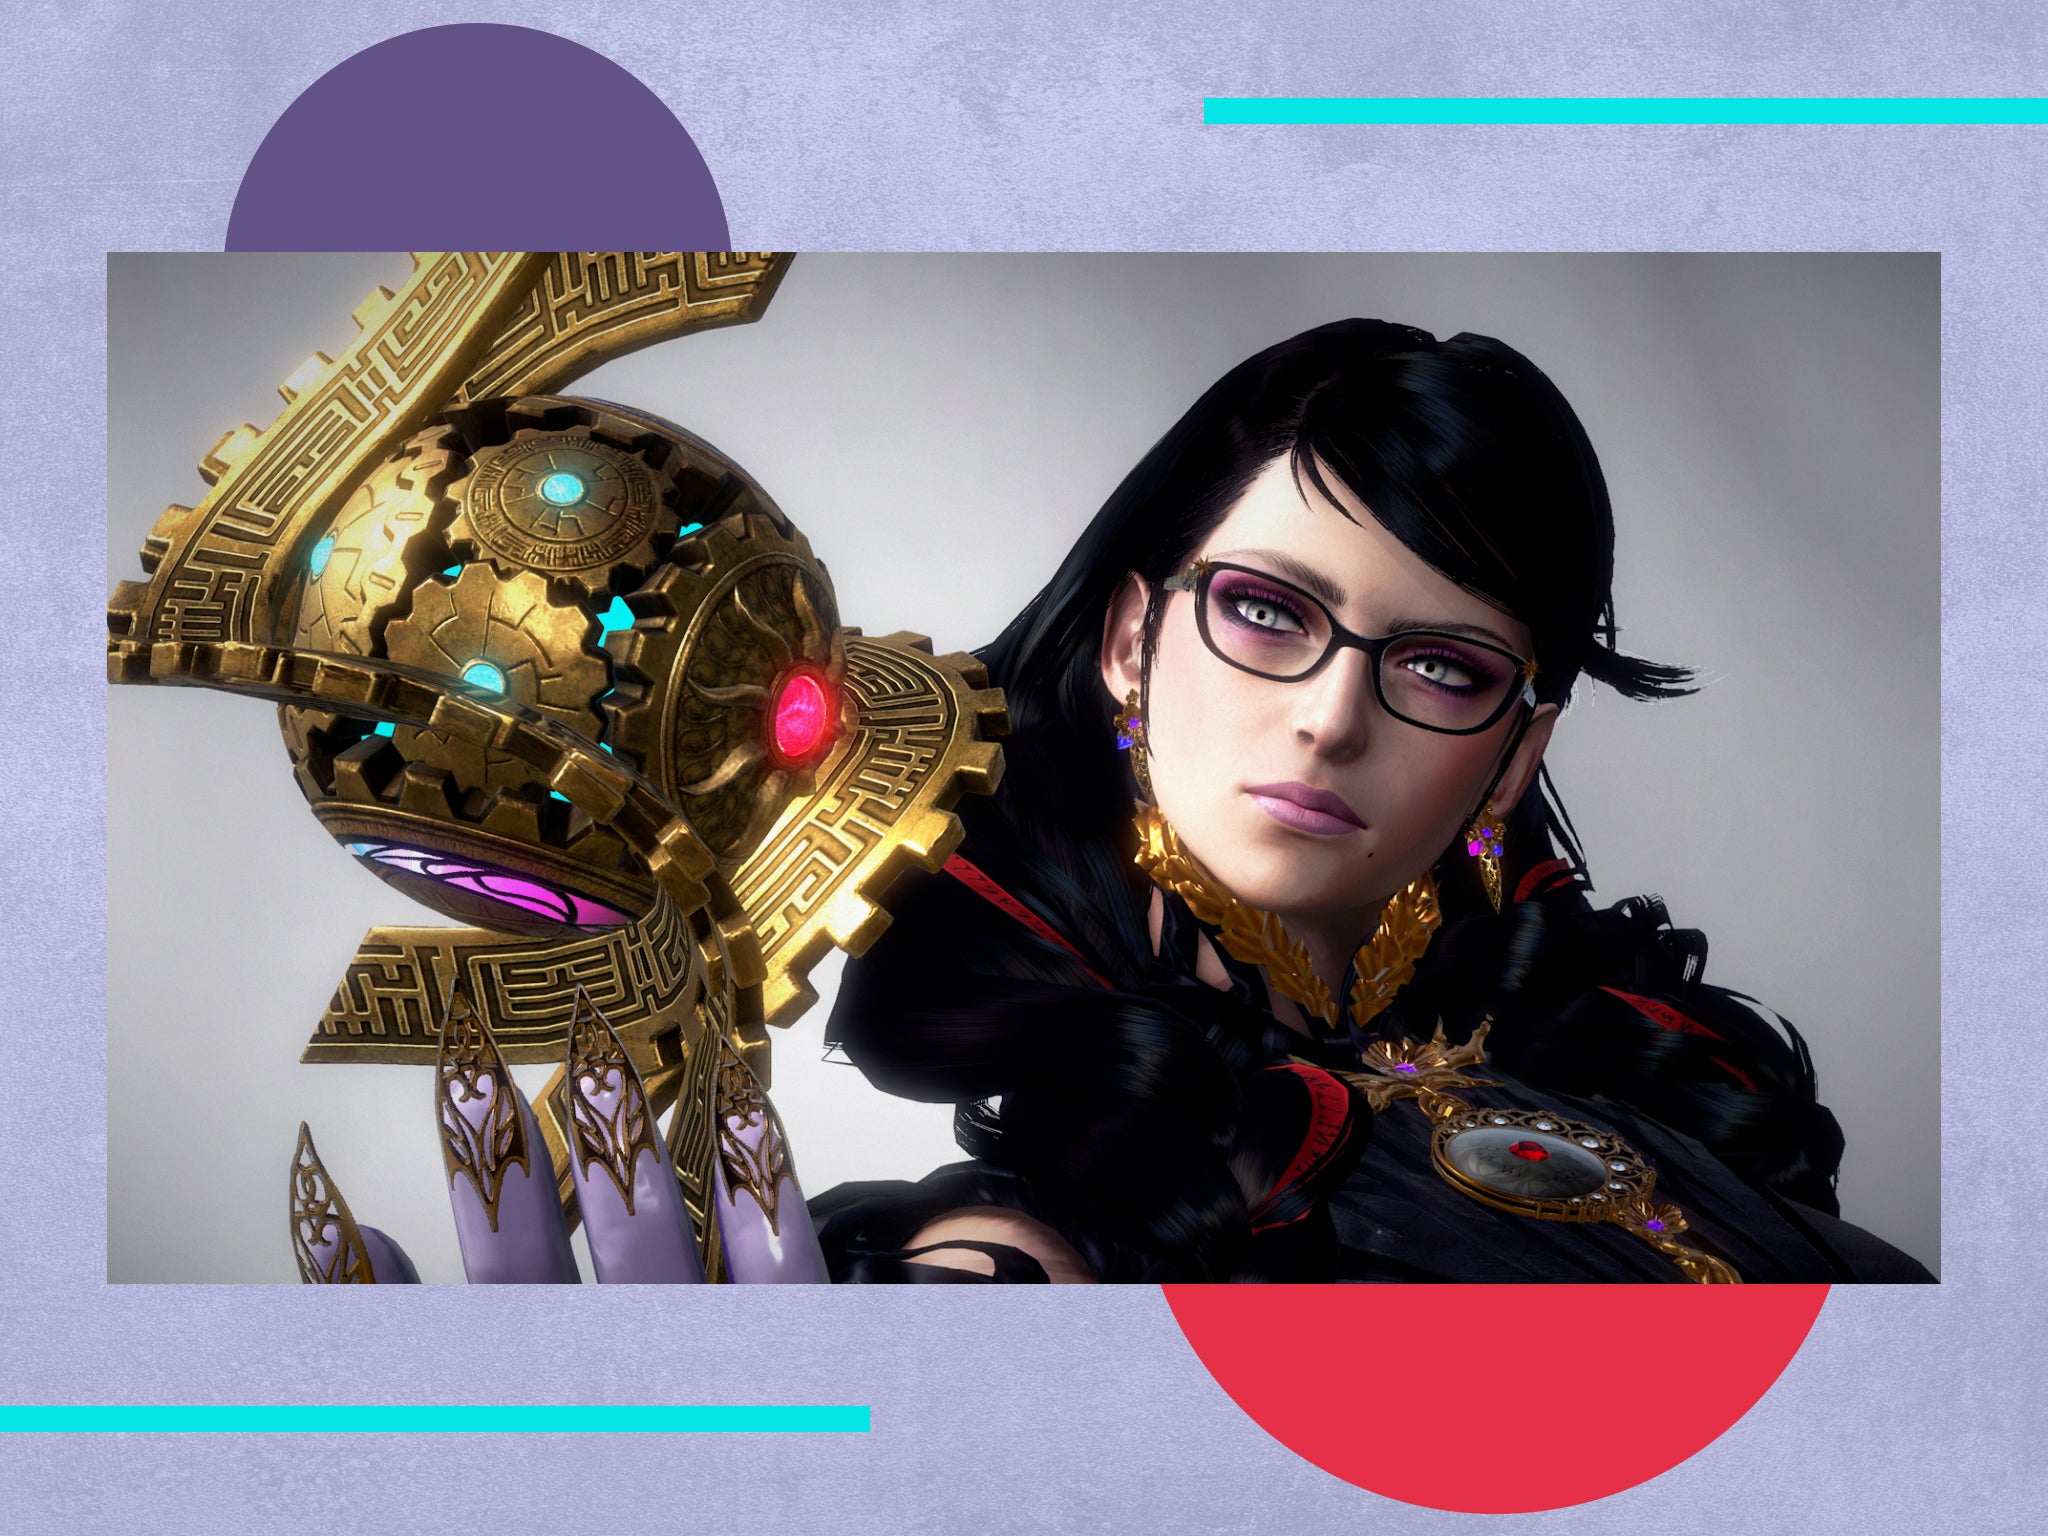 Best pre-order deals for Bayonetta 3 on the Nintendo Switch